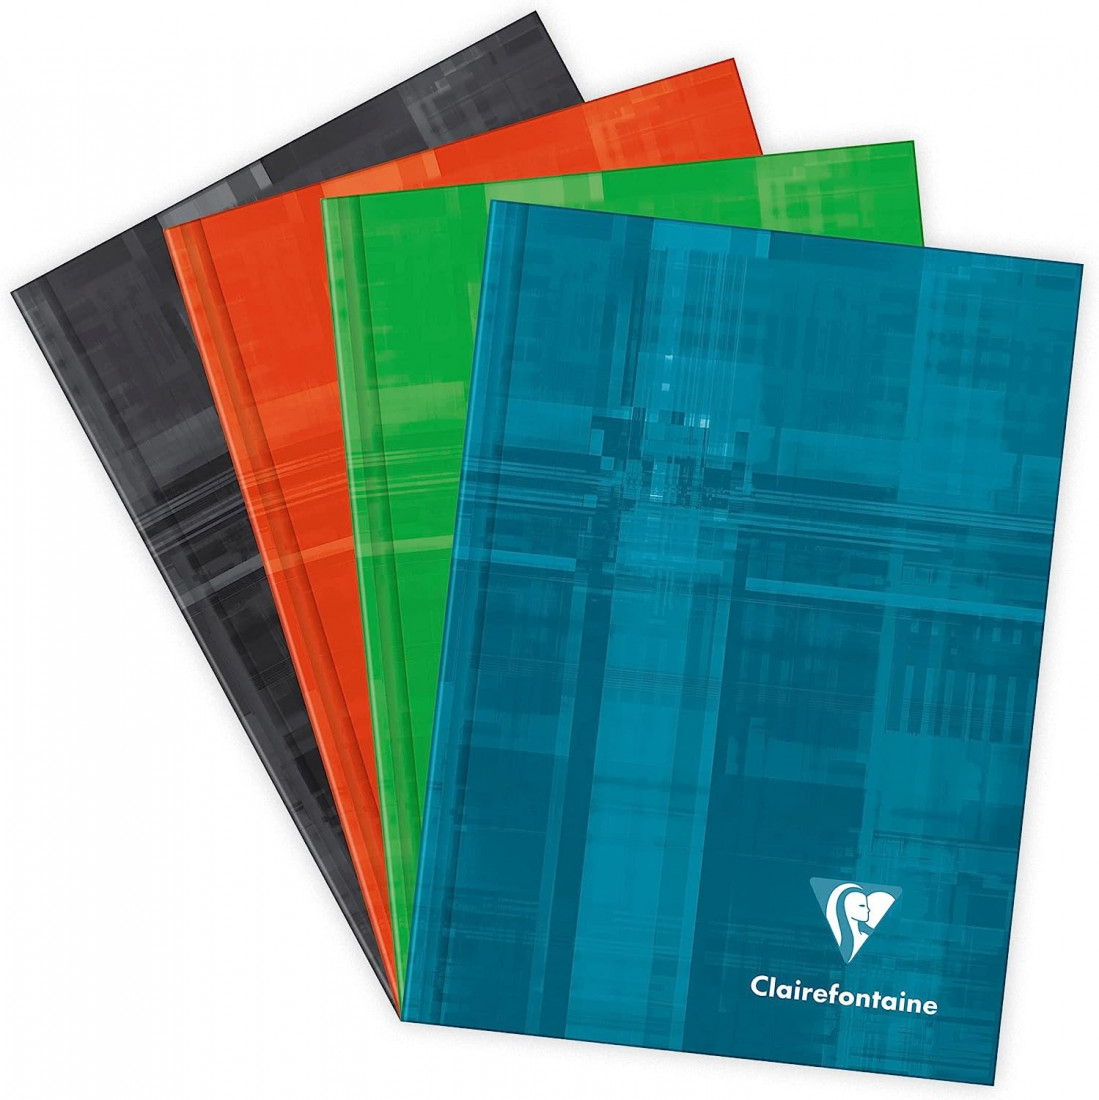 Clairefontaine notebook hard cover A6 10,5X14,8cm, 192 pages, lined, 90g, 69496